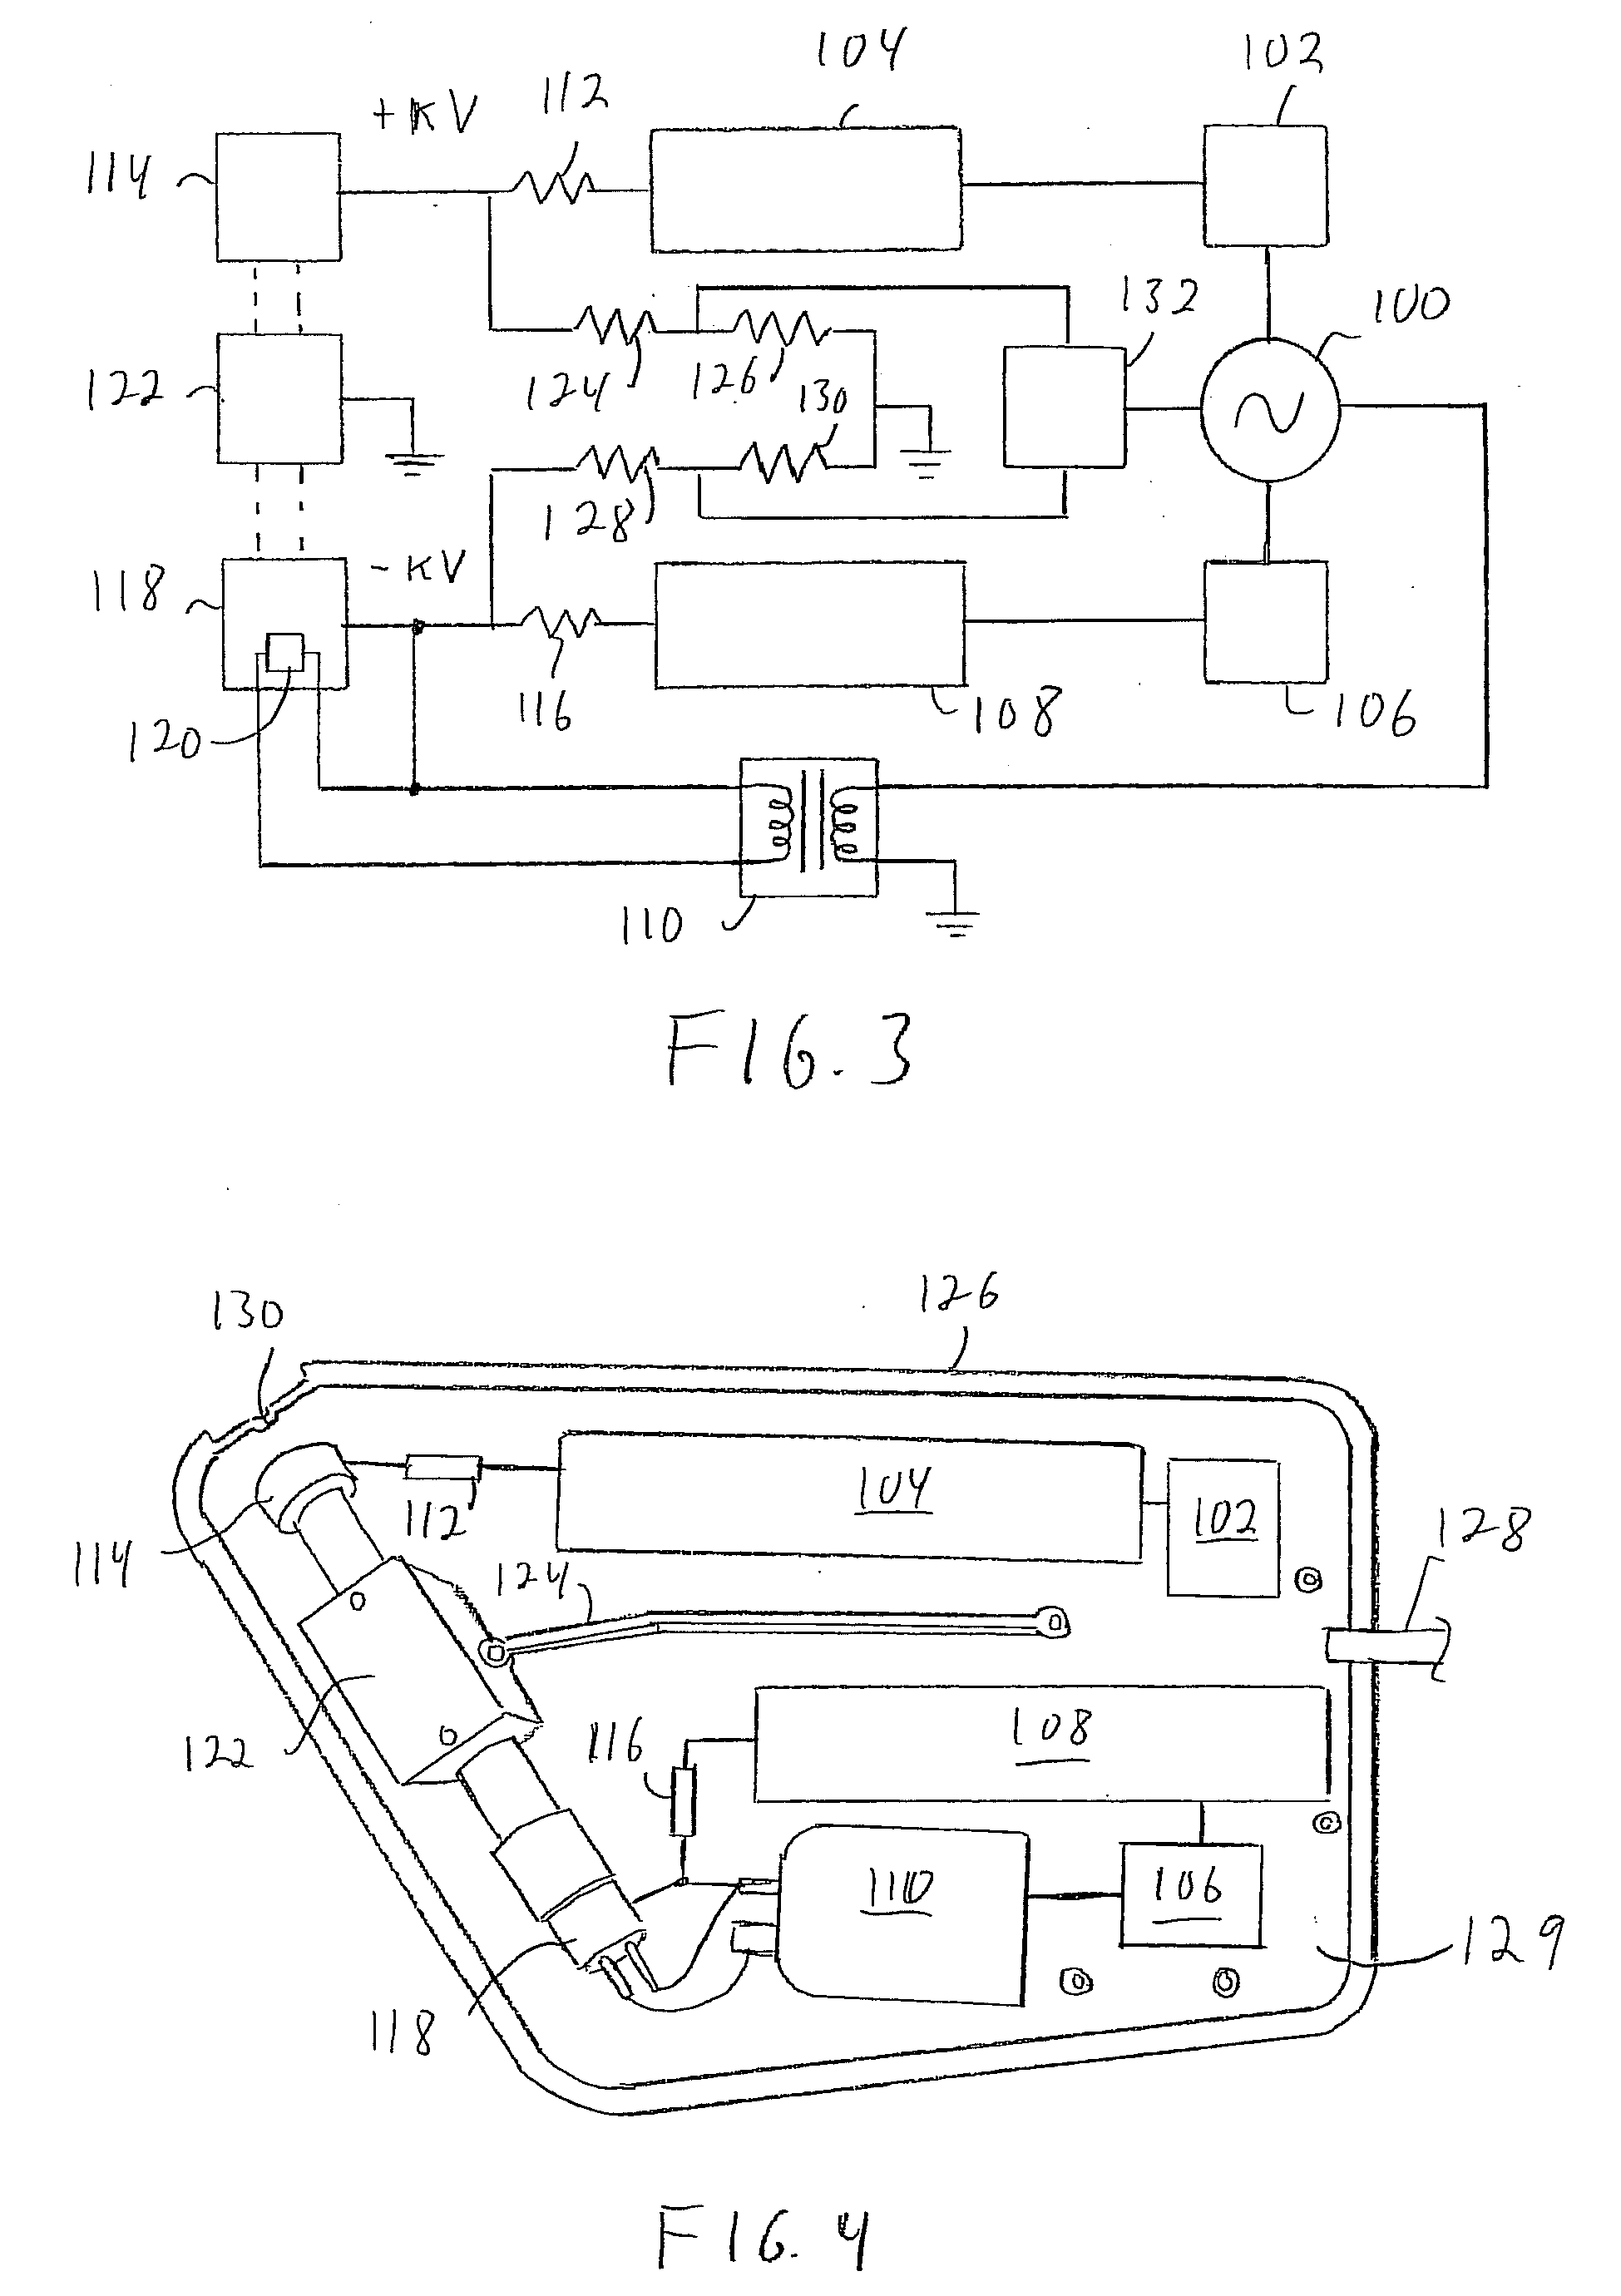 Compact high voltage x-ray source system and method for x-ray inspection applications